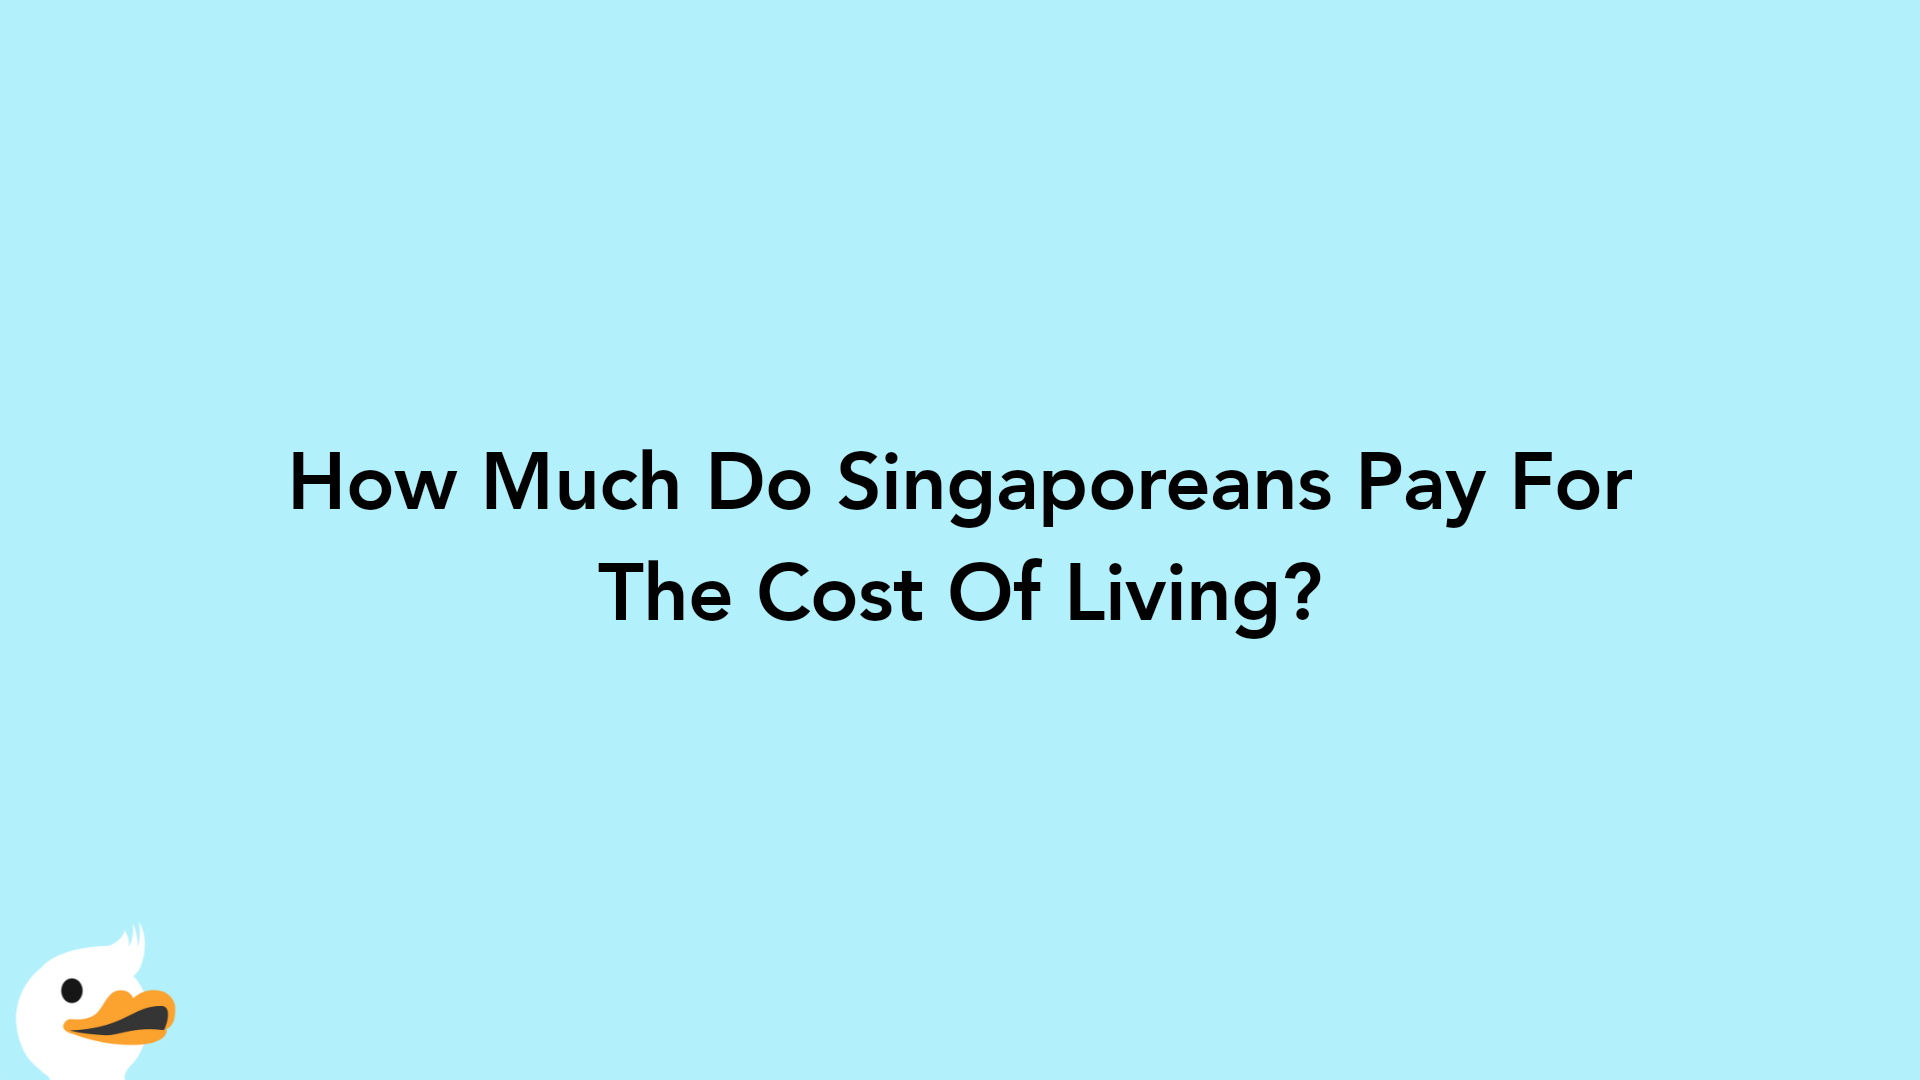 How Much Do Singaporeans Pay For The Cost Of Living?